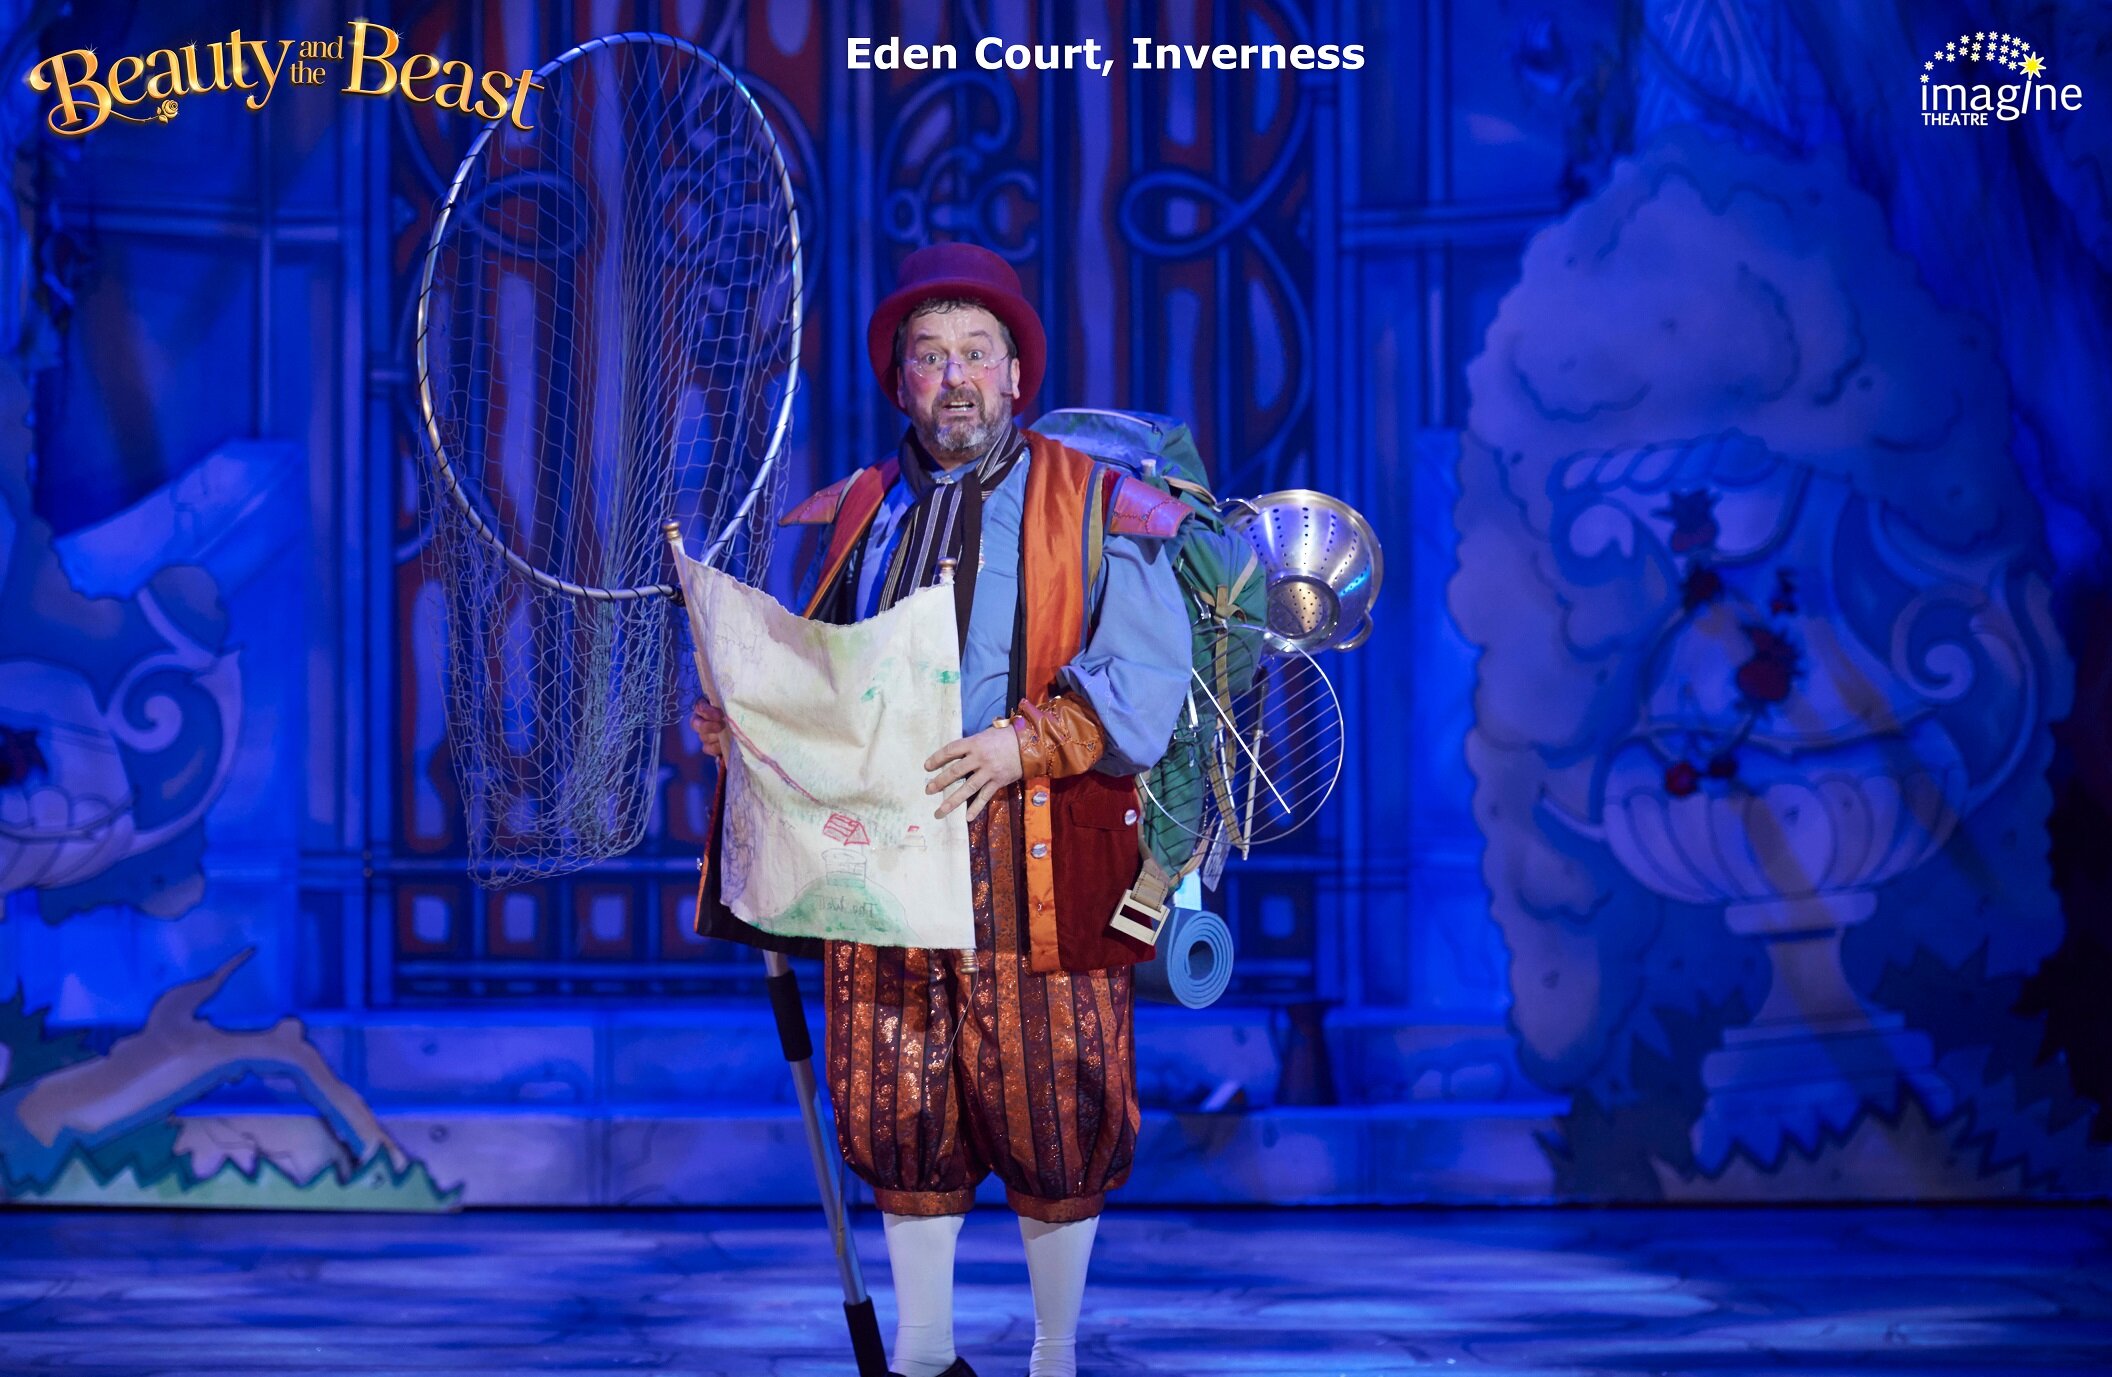  Beauty and the Beast, Eden Court 2019 Panto 